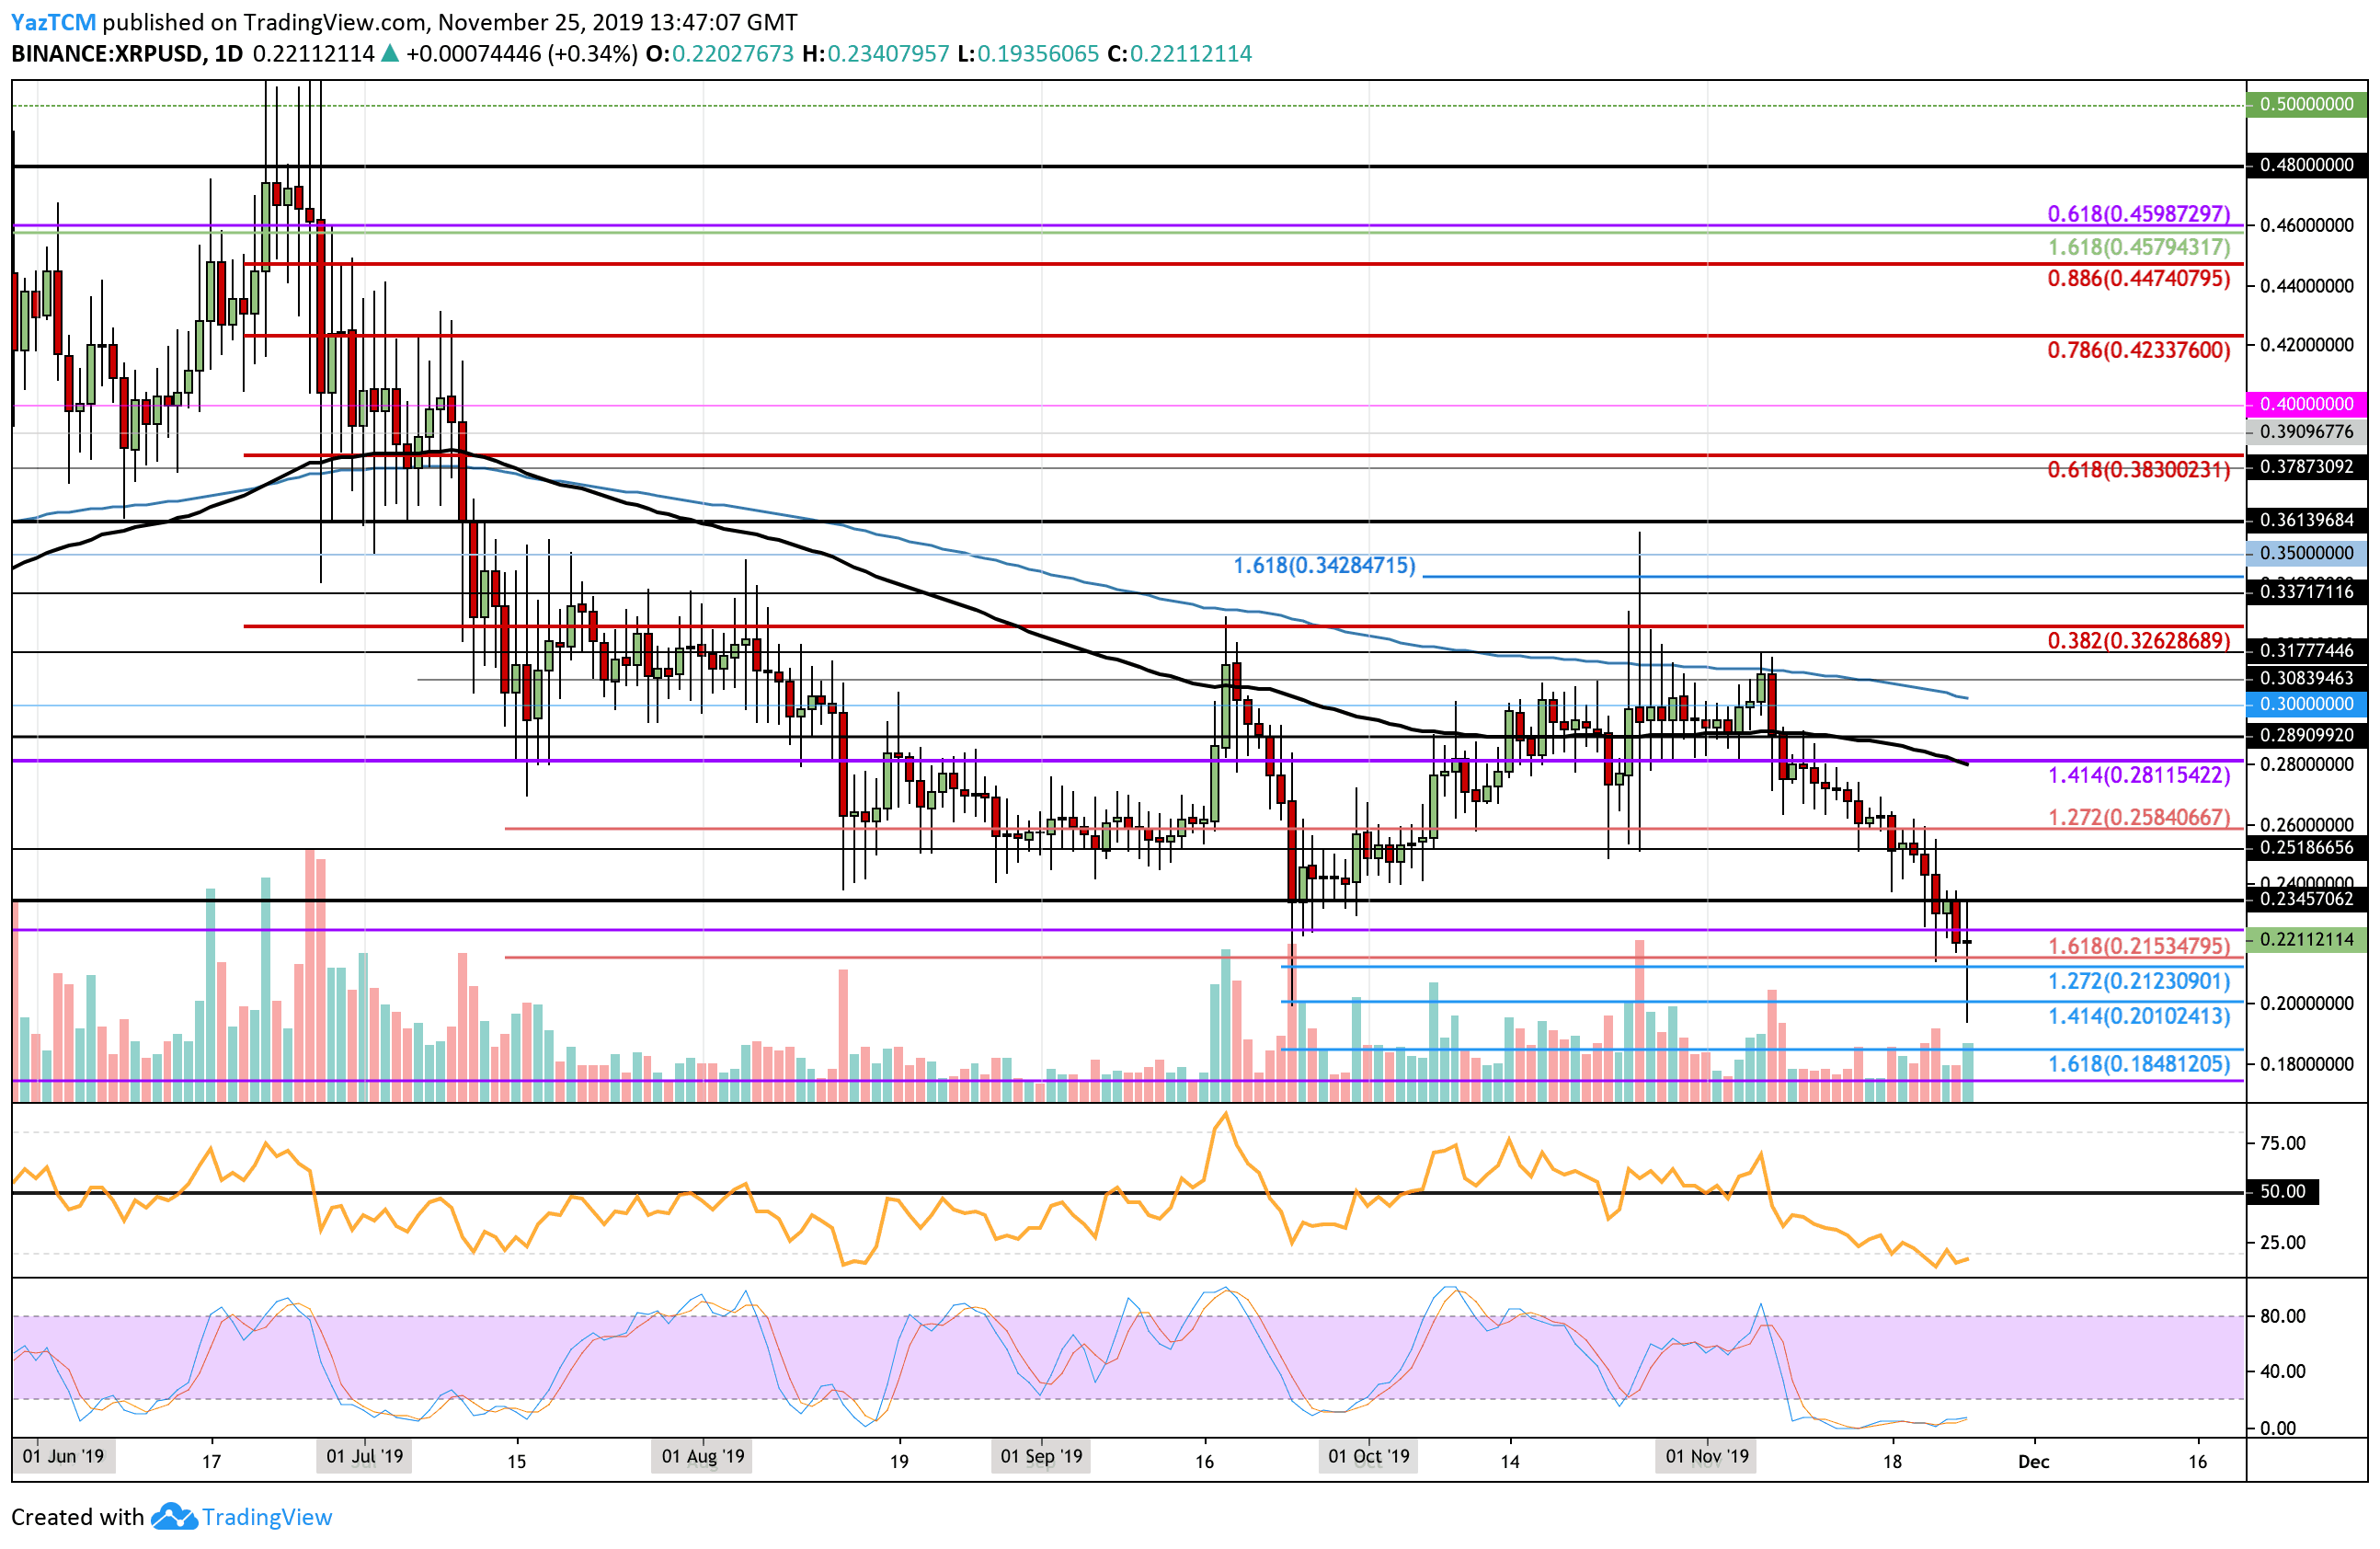 Ripple Recorded Today Its Lowest Price Since 2017: Can XRP Recover From Here? Analysis & Overview